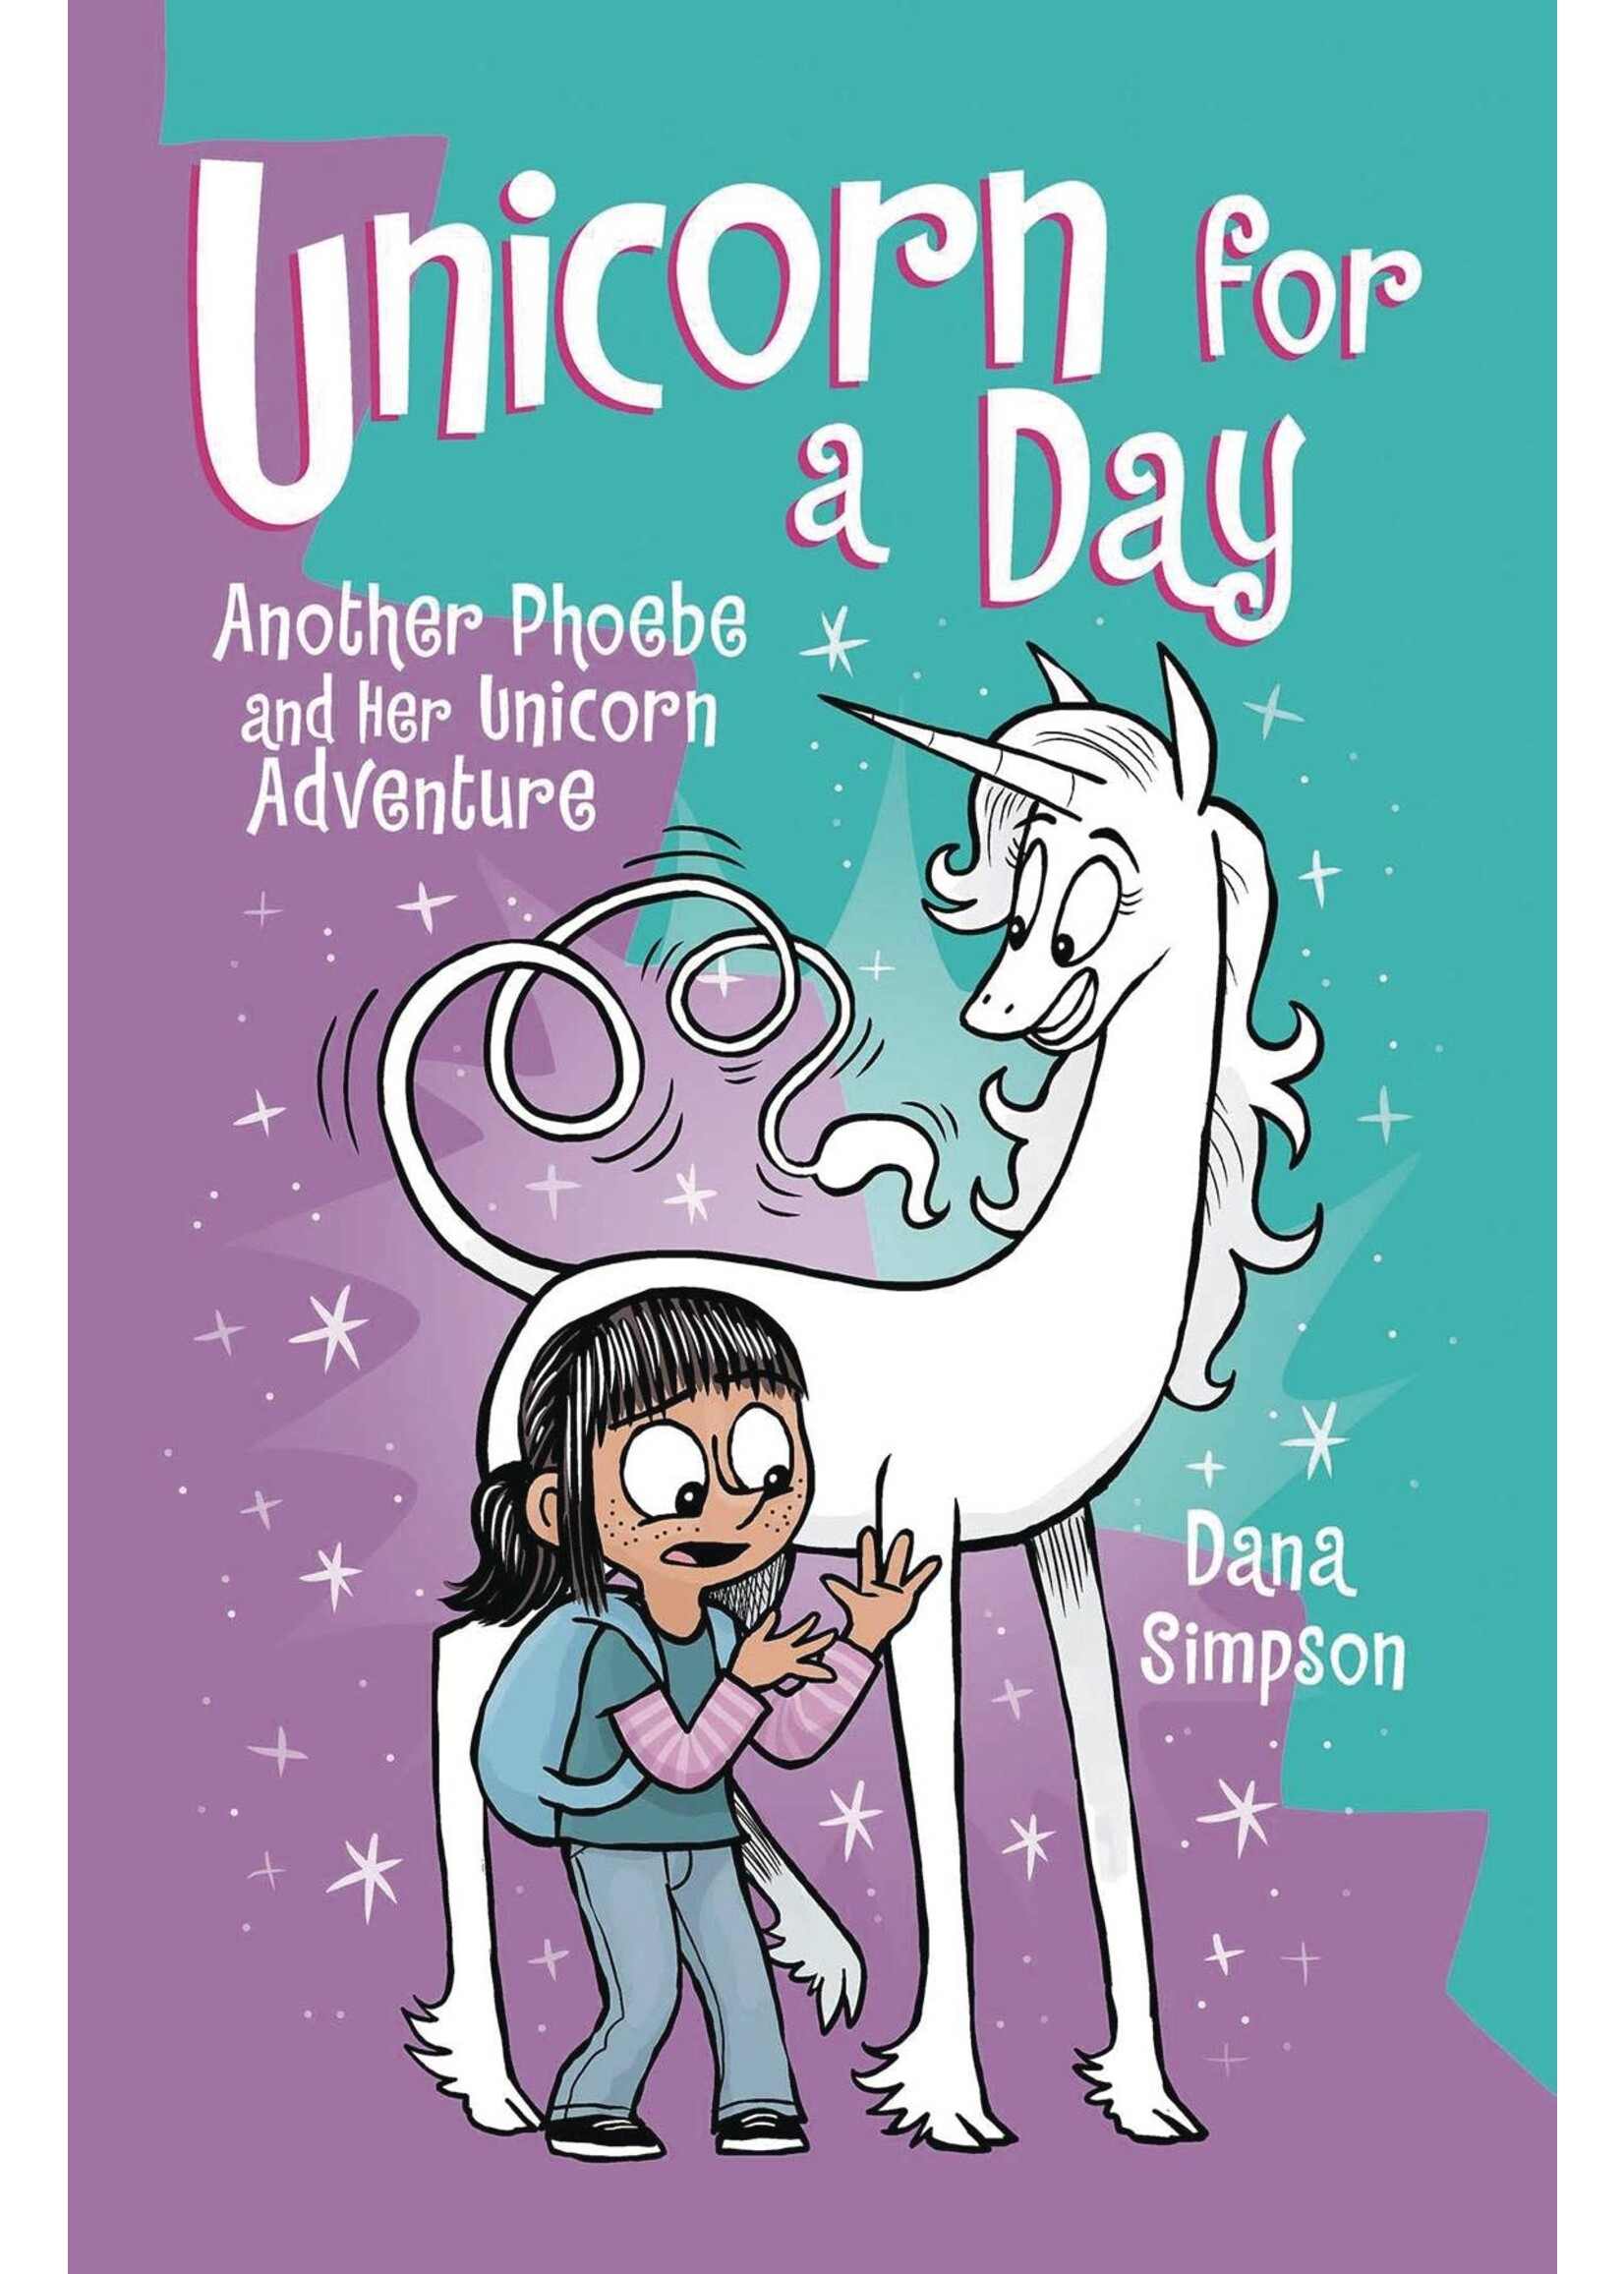 ANDREWS MCMEEL PHOEBE & HER UNICORN GN VOL 18 UNICORN FOR DAY